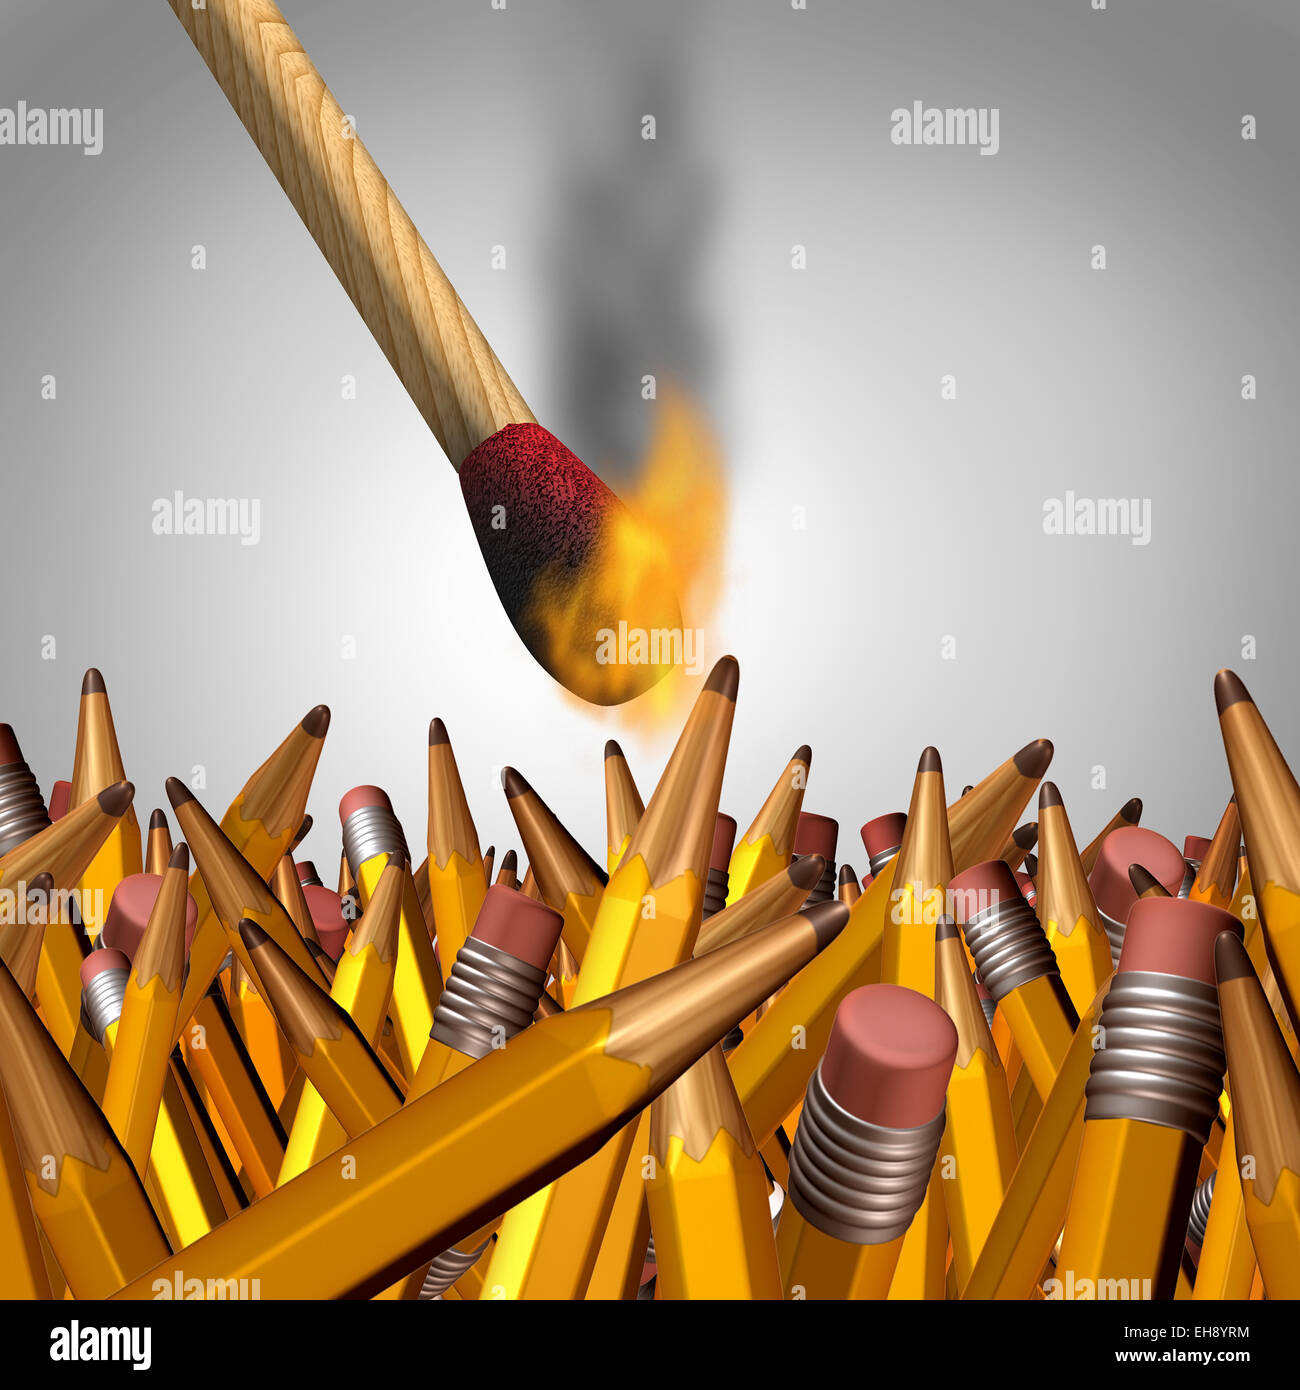 Creative burnout business concept as an ignited match stick burning yellow pencils and as a symbol for education and learning risks and dangers. Stock Photo